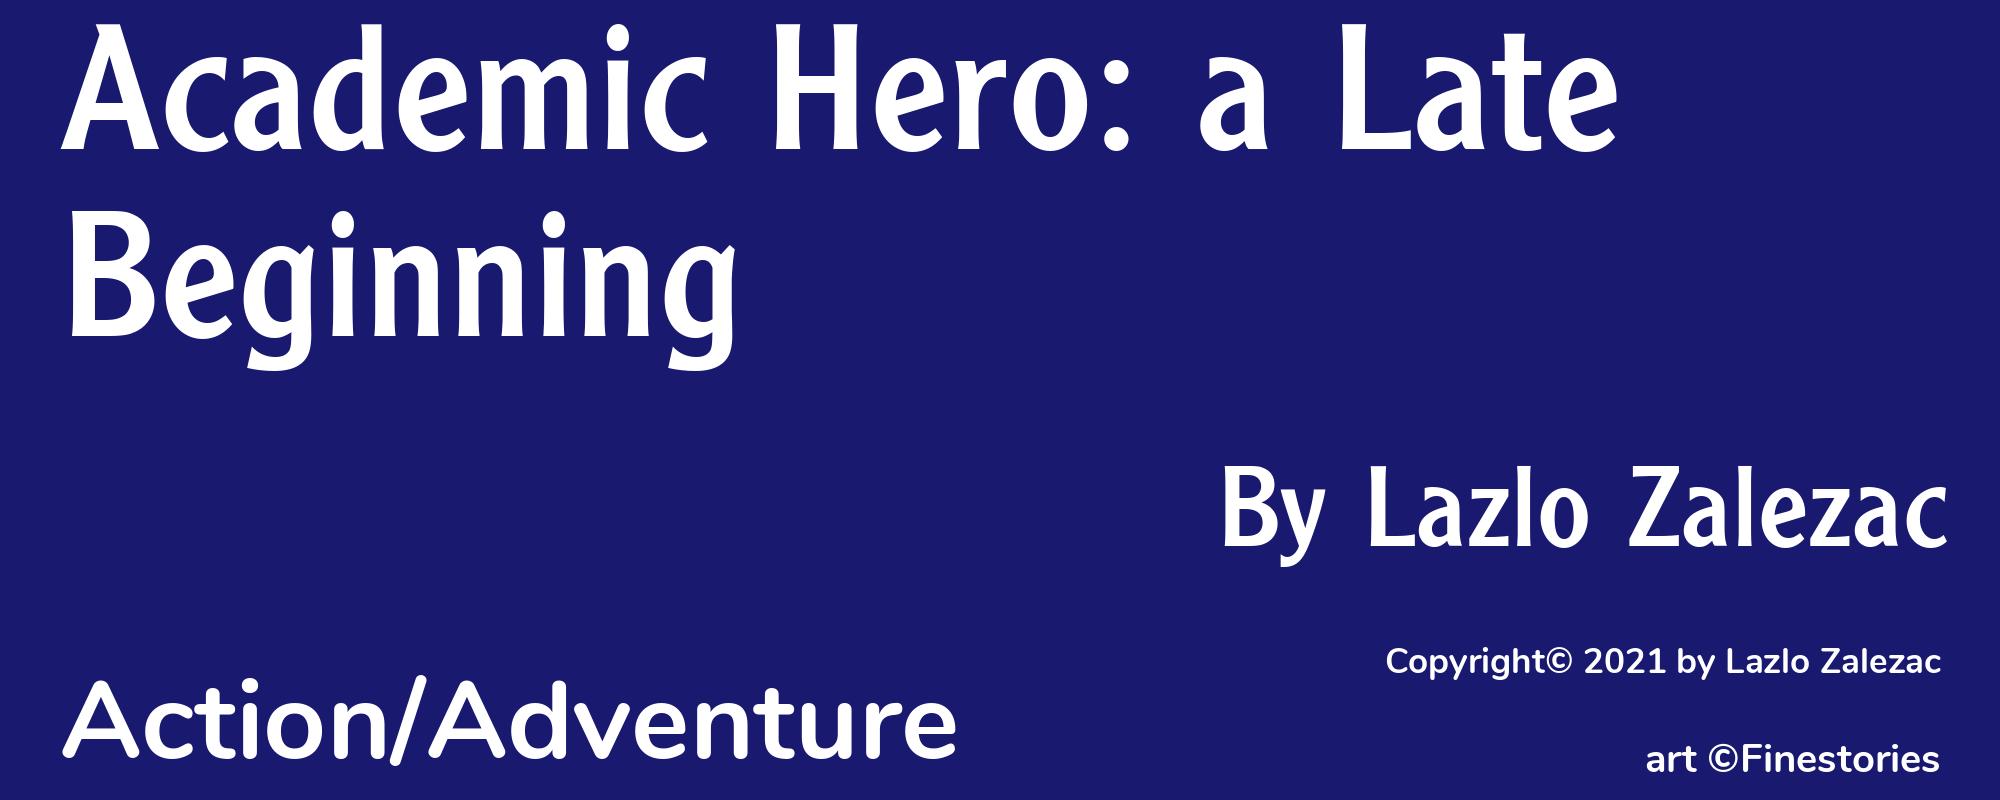 Academic Hero: a Late Beginning - Cover